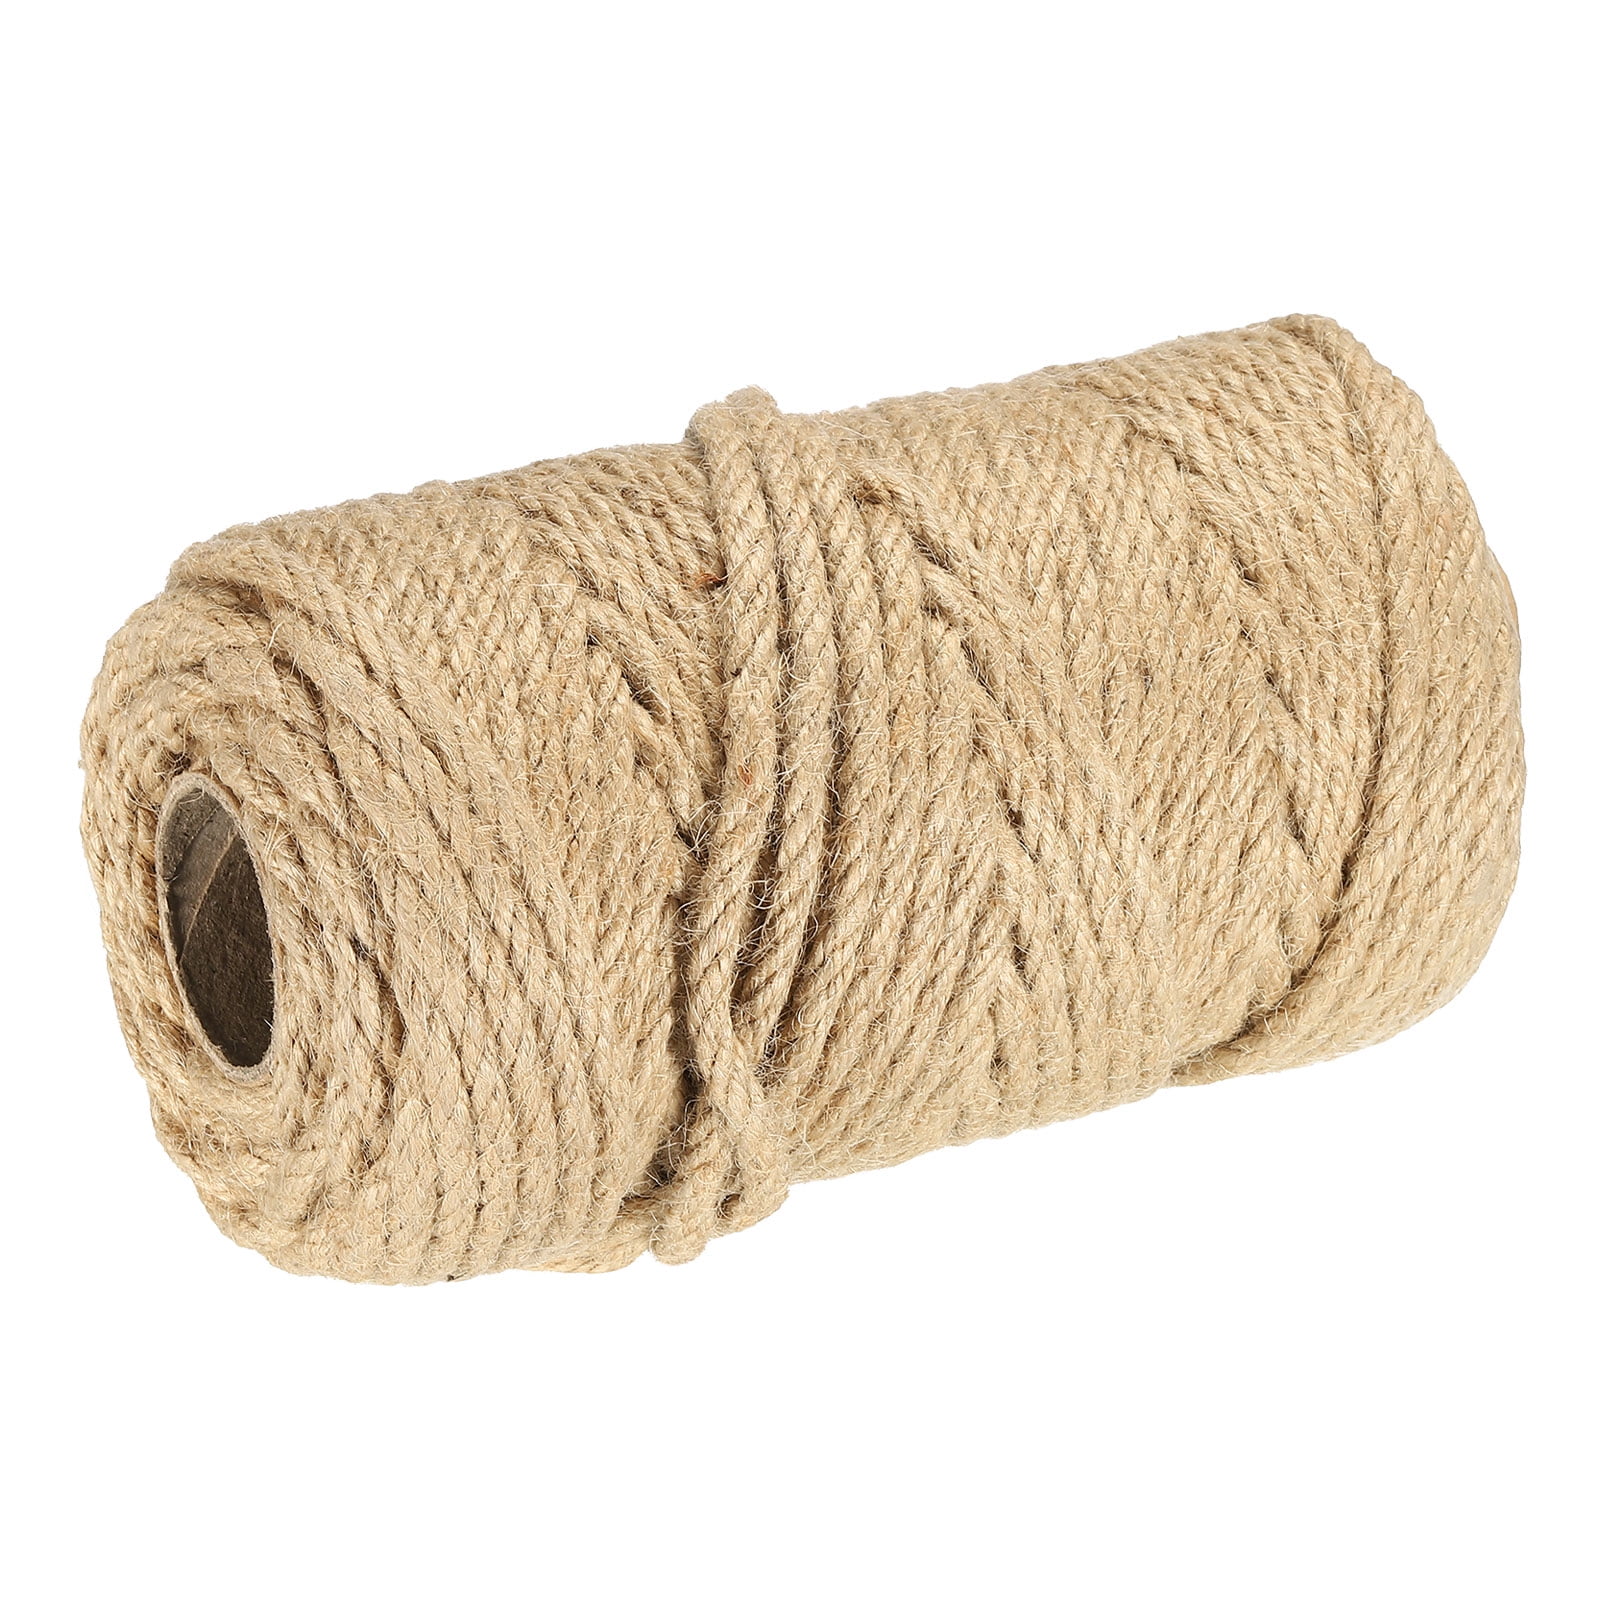 66 Feet 6mm Jute Rope 3 Ply ,100% Natural Thick Jute Hemp Rope Strong  String Craft Twine for DIY & Arts Crafts, Packing Bundling